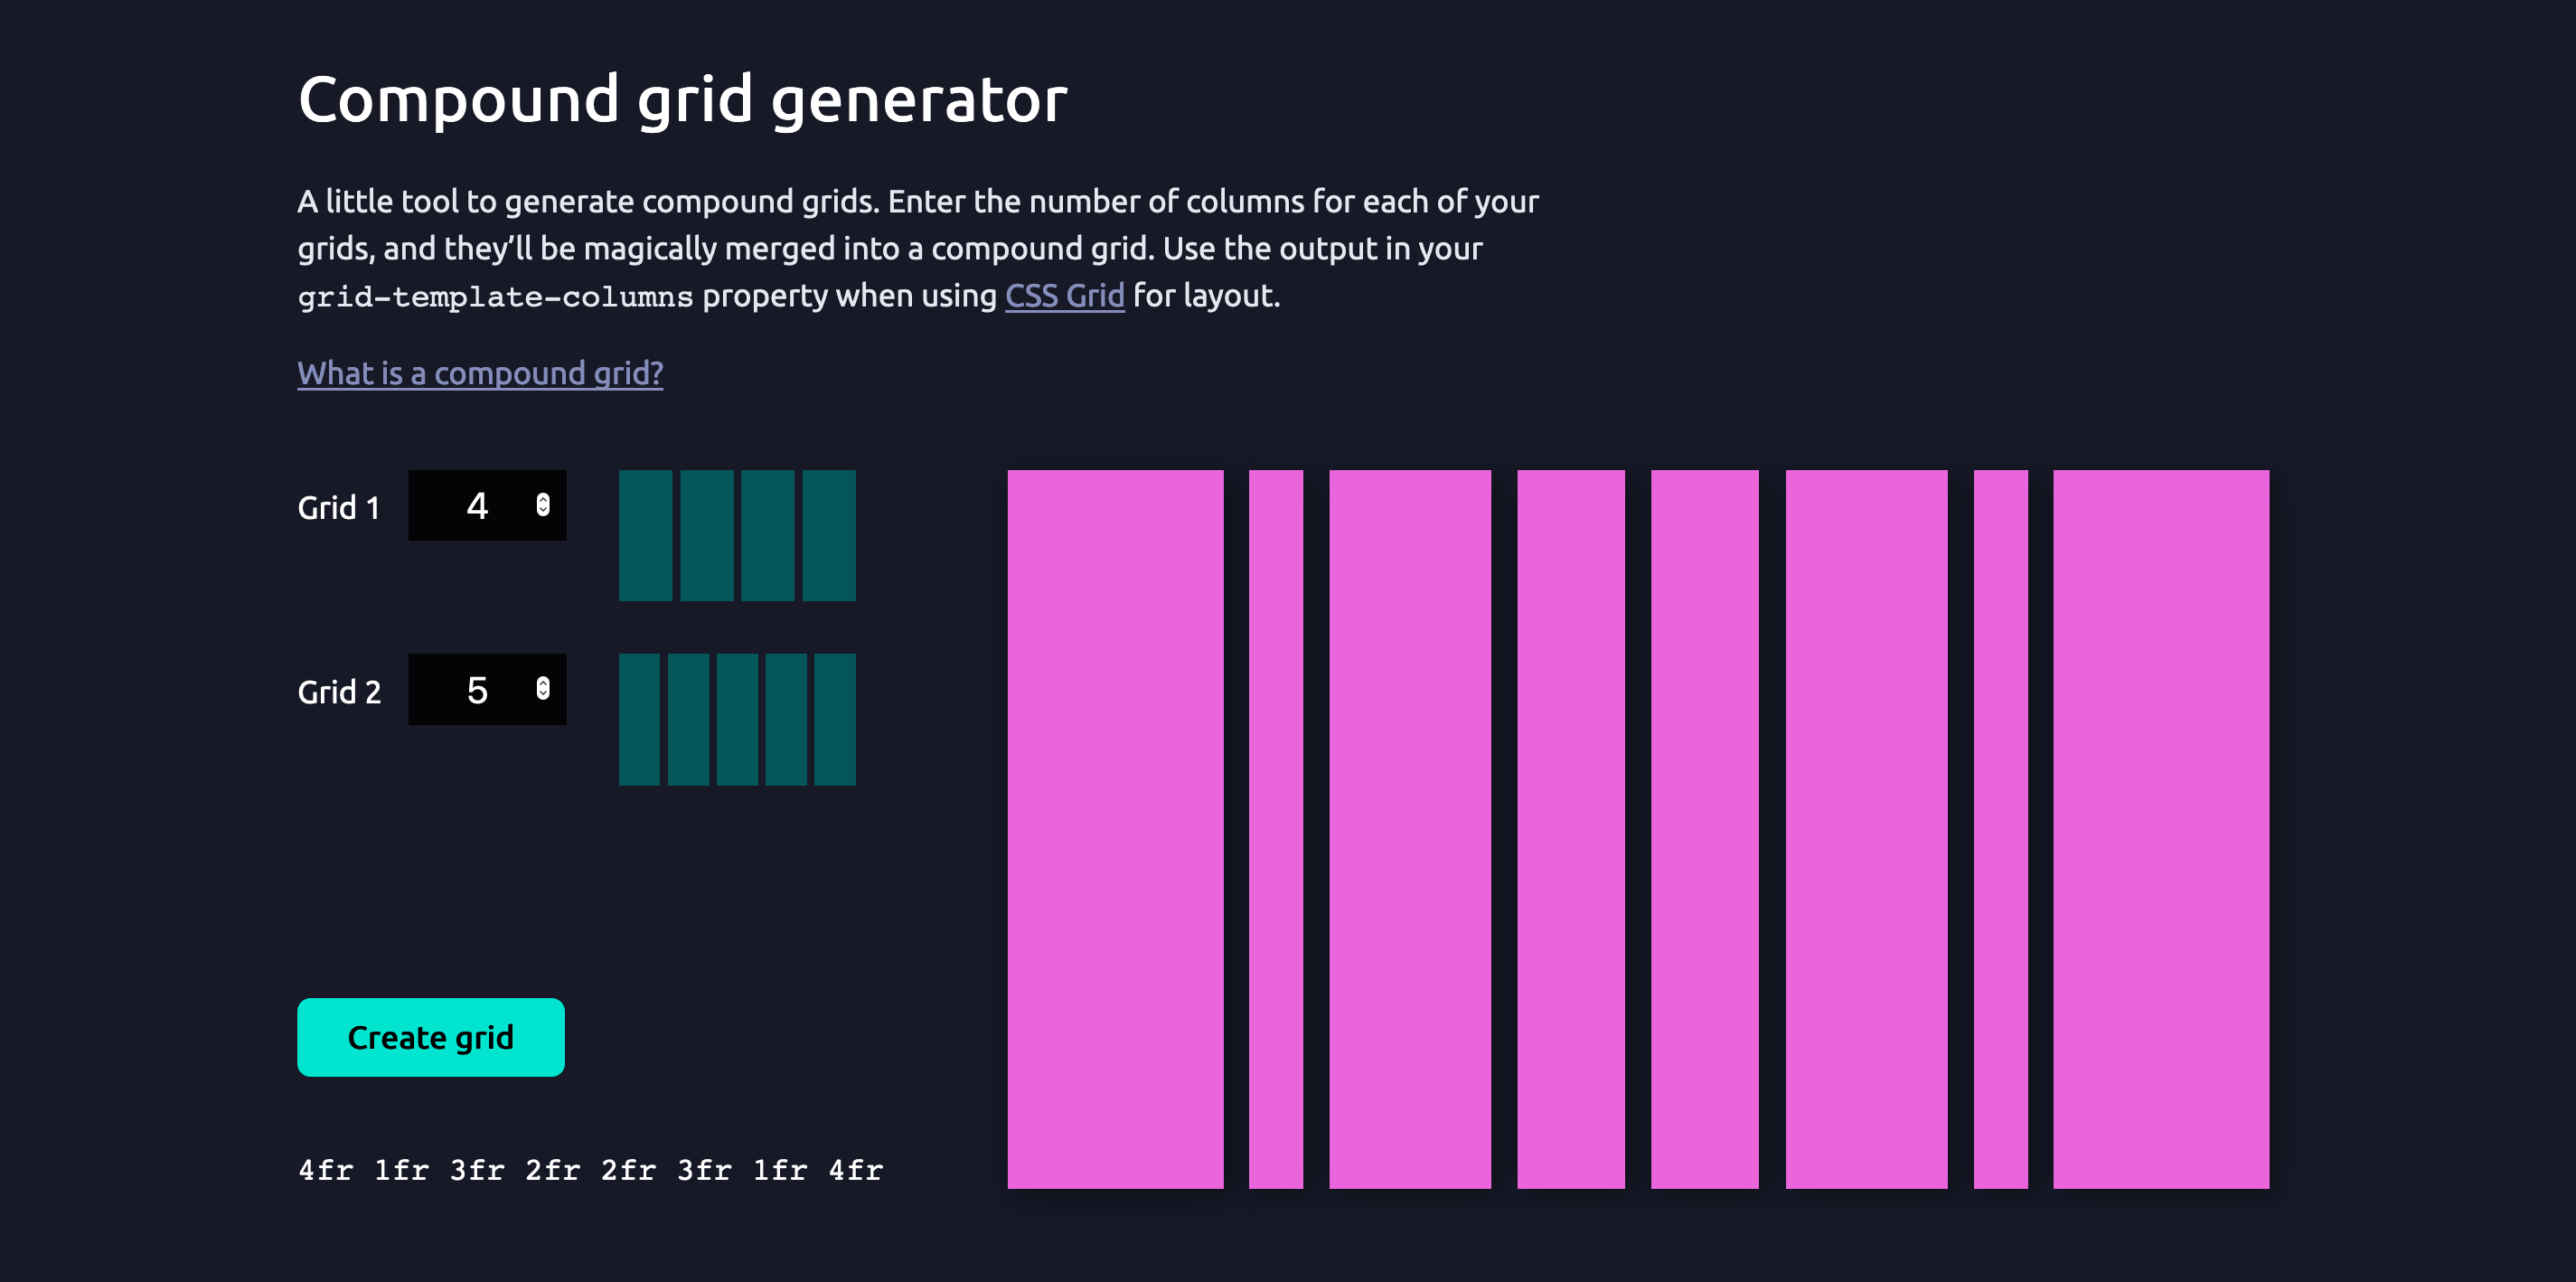 Screenshot of the compound grid generator tool